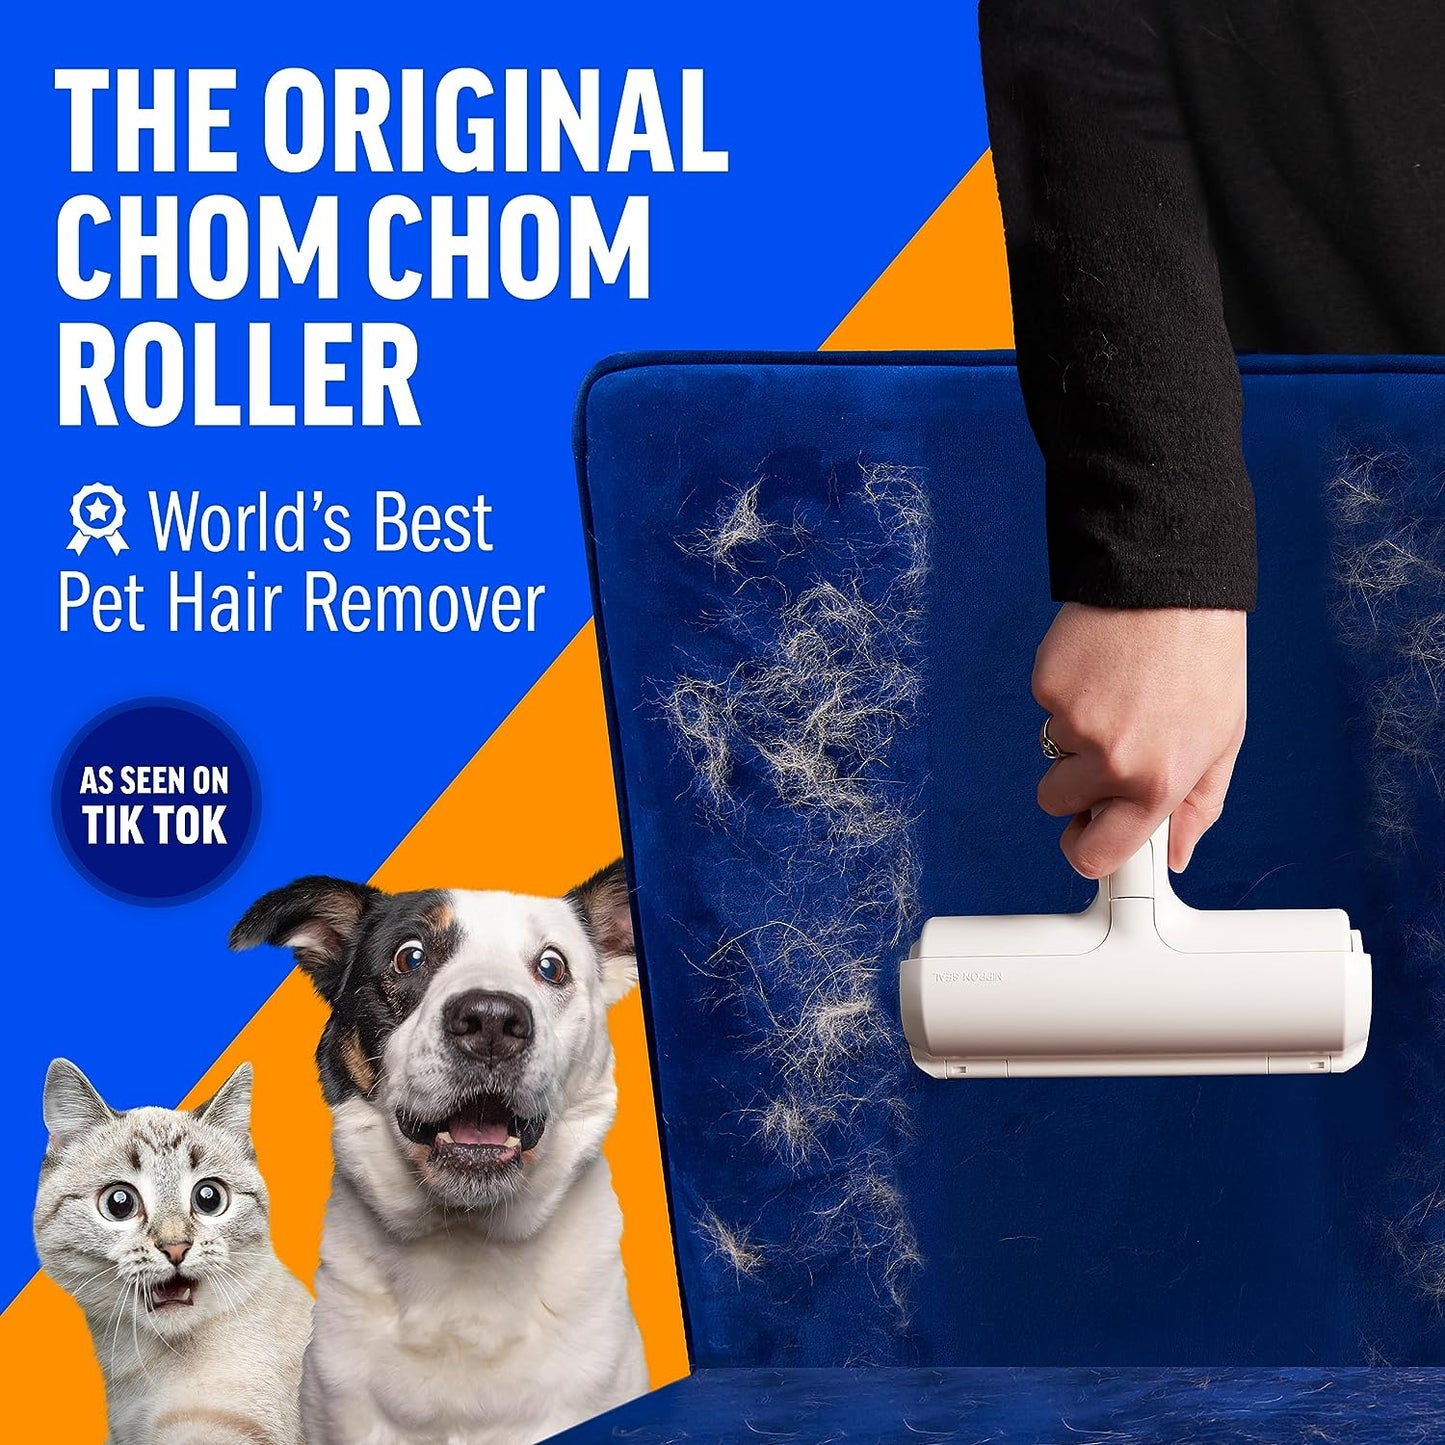 Chom Chom Roller Pet Hair Remover and Reusable Lint Roller -  Cat and Dog Hair Remover for Furniture, Couch, Carpet, Clothing and Bedding - Portable, Multi-Surface Fur Removal Tool